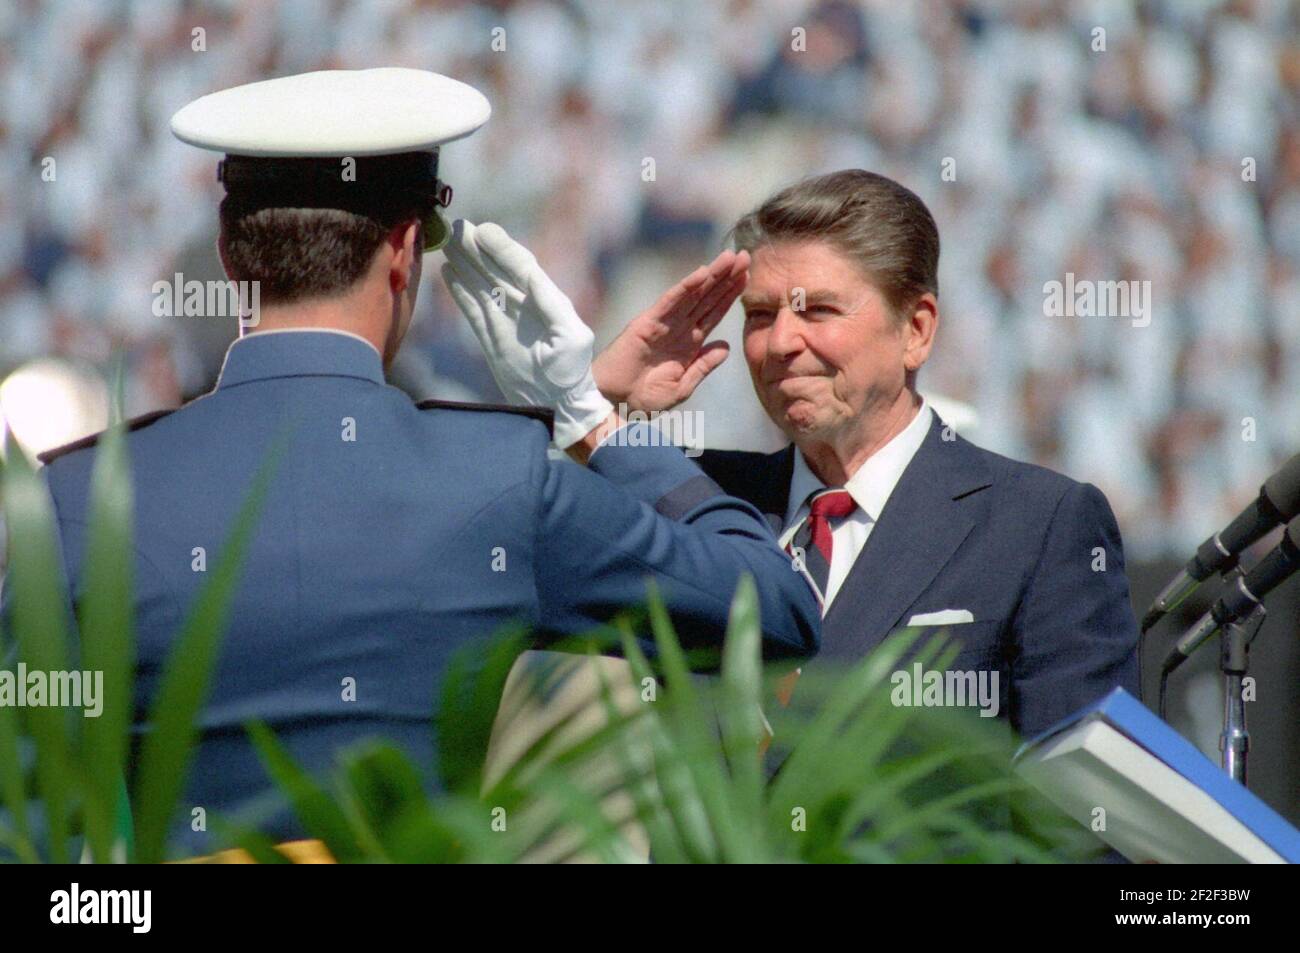 President Ronald Reagan Salutes an Air Force Cadet at the United States Air Force Academy Commencement in Colorado Springs, Colorado. Stock Photo